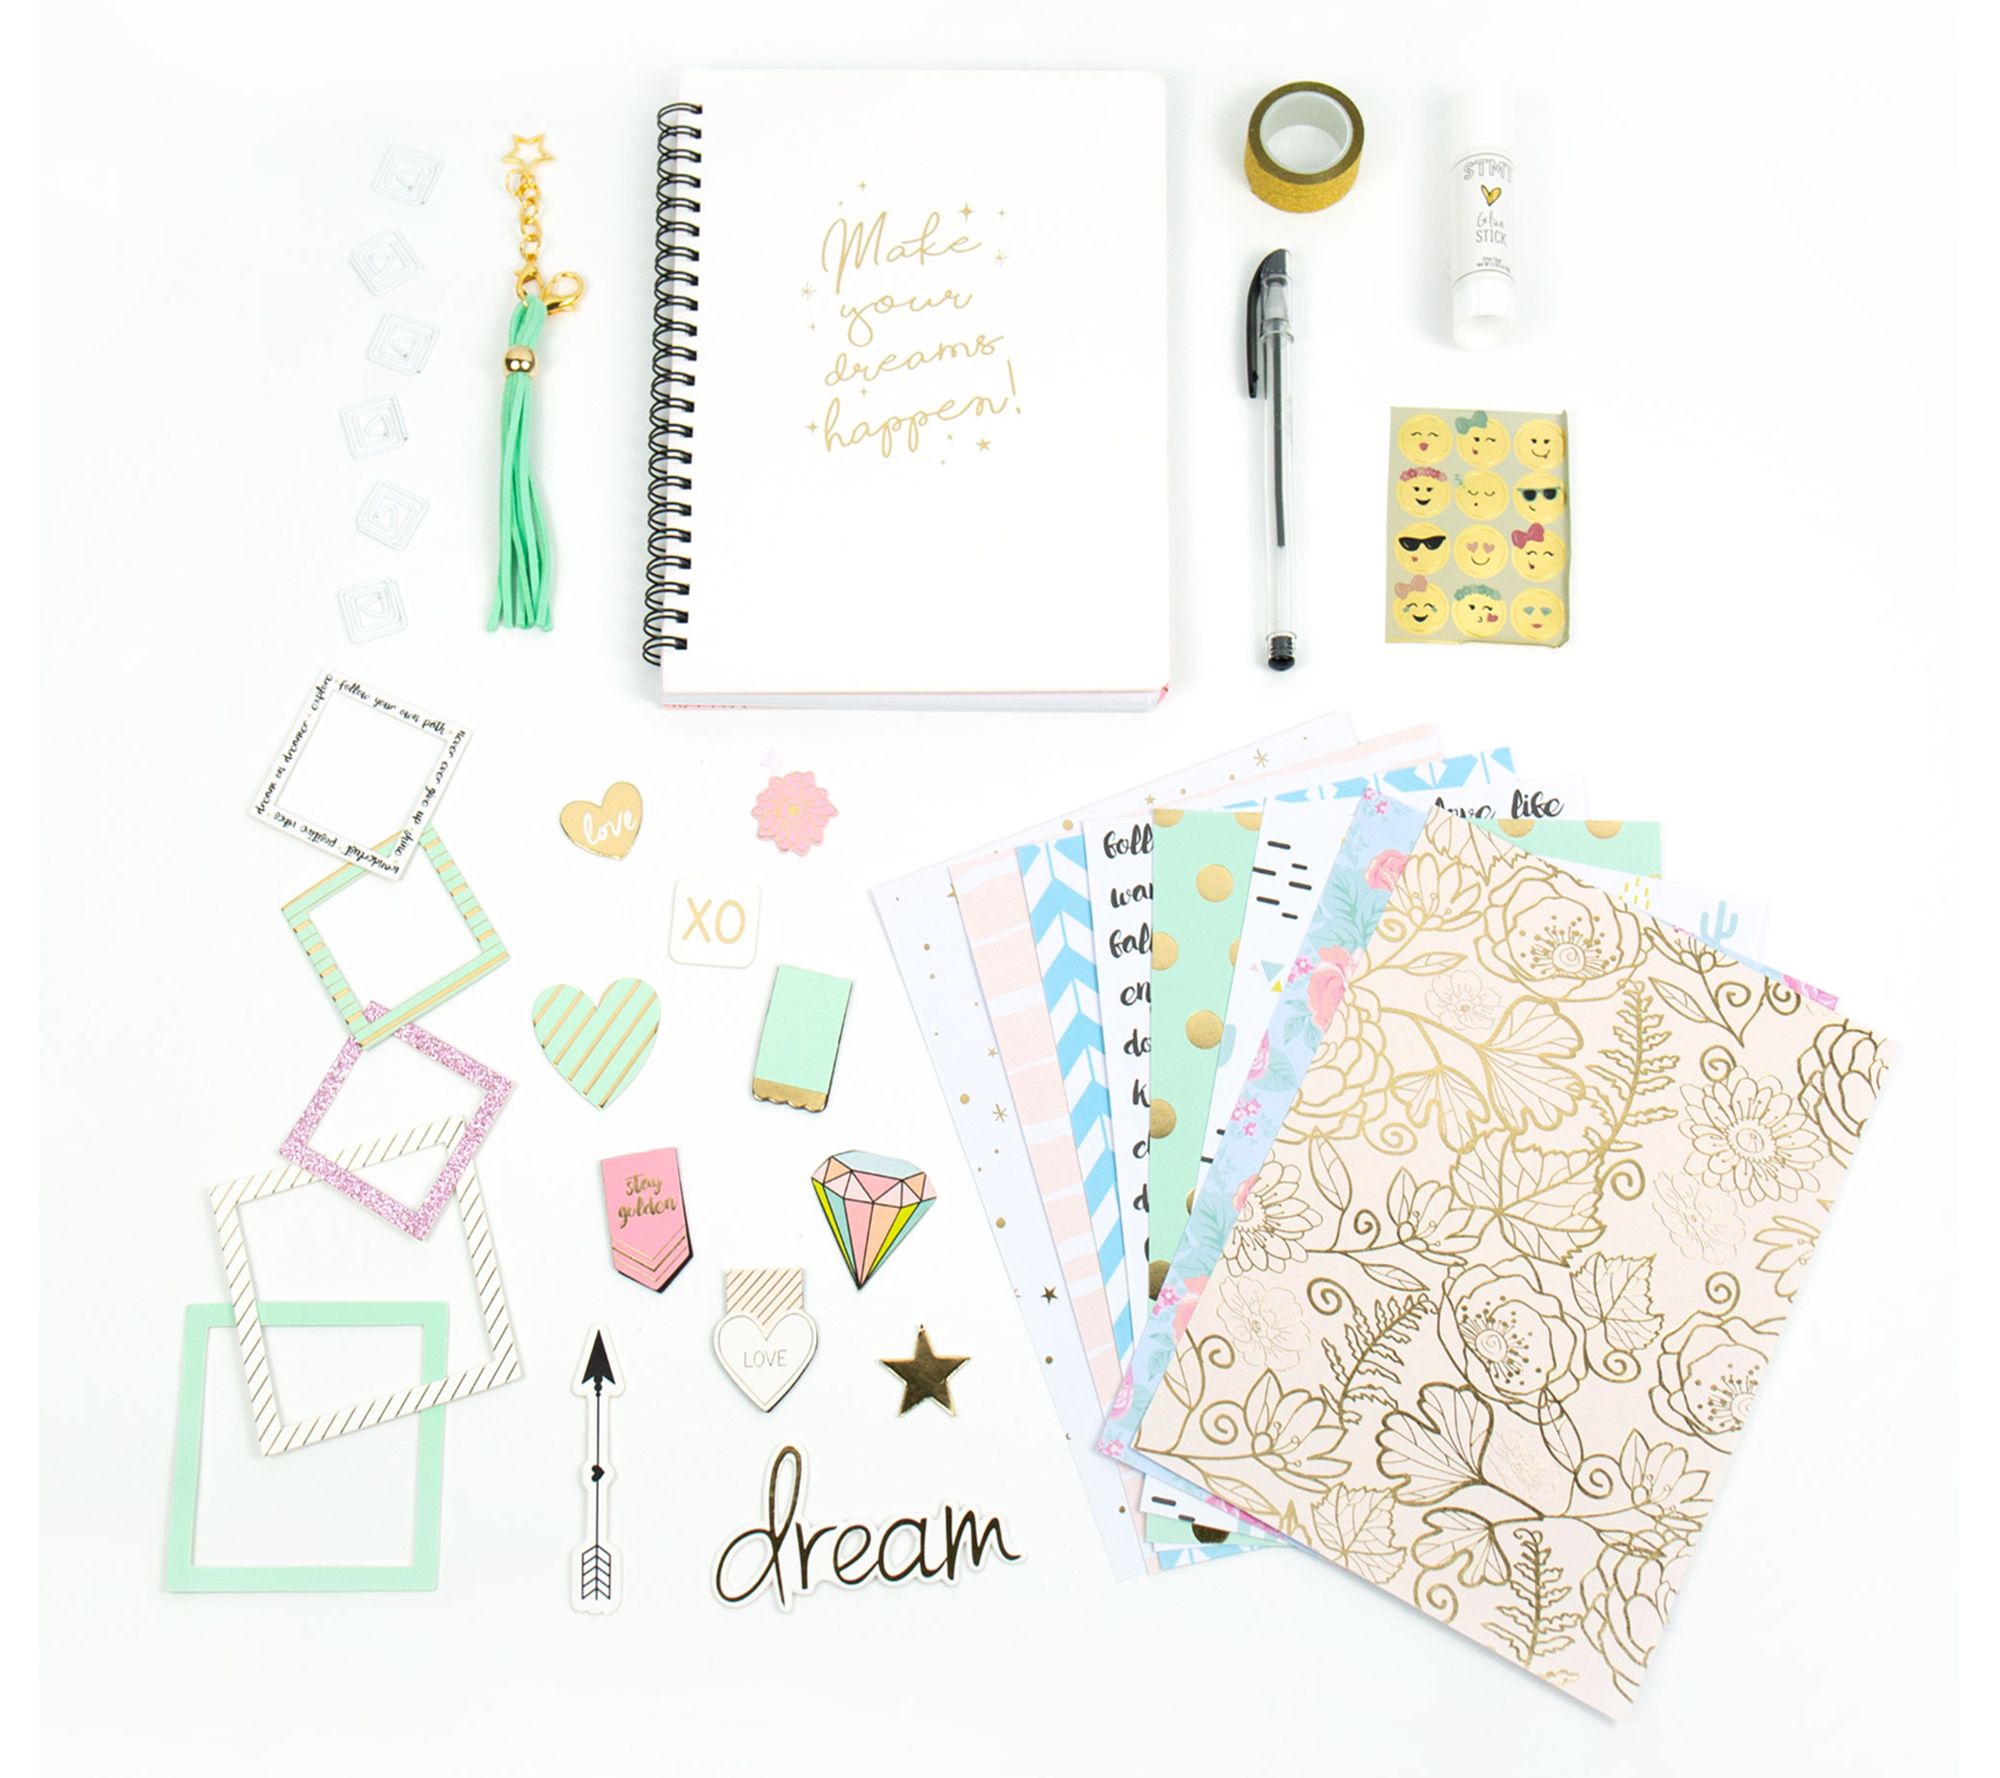 Give Your Journal Life with the STMT DIY Journaling Kit